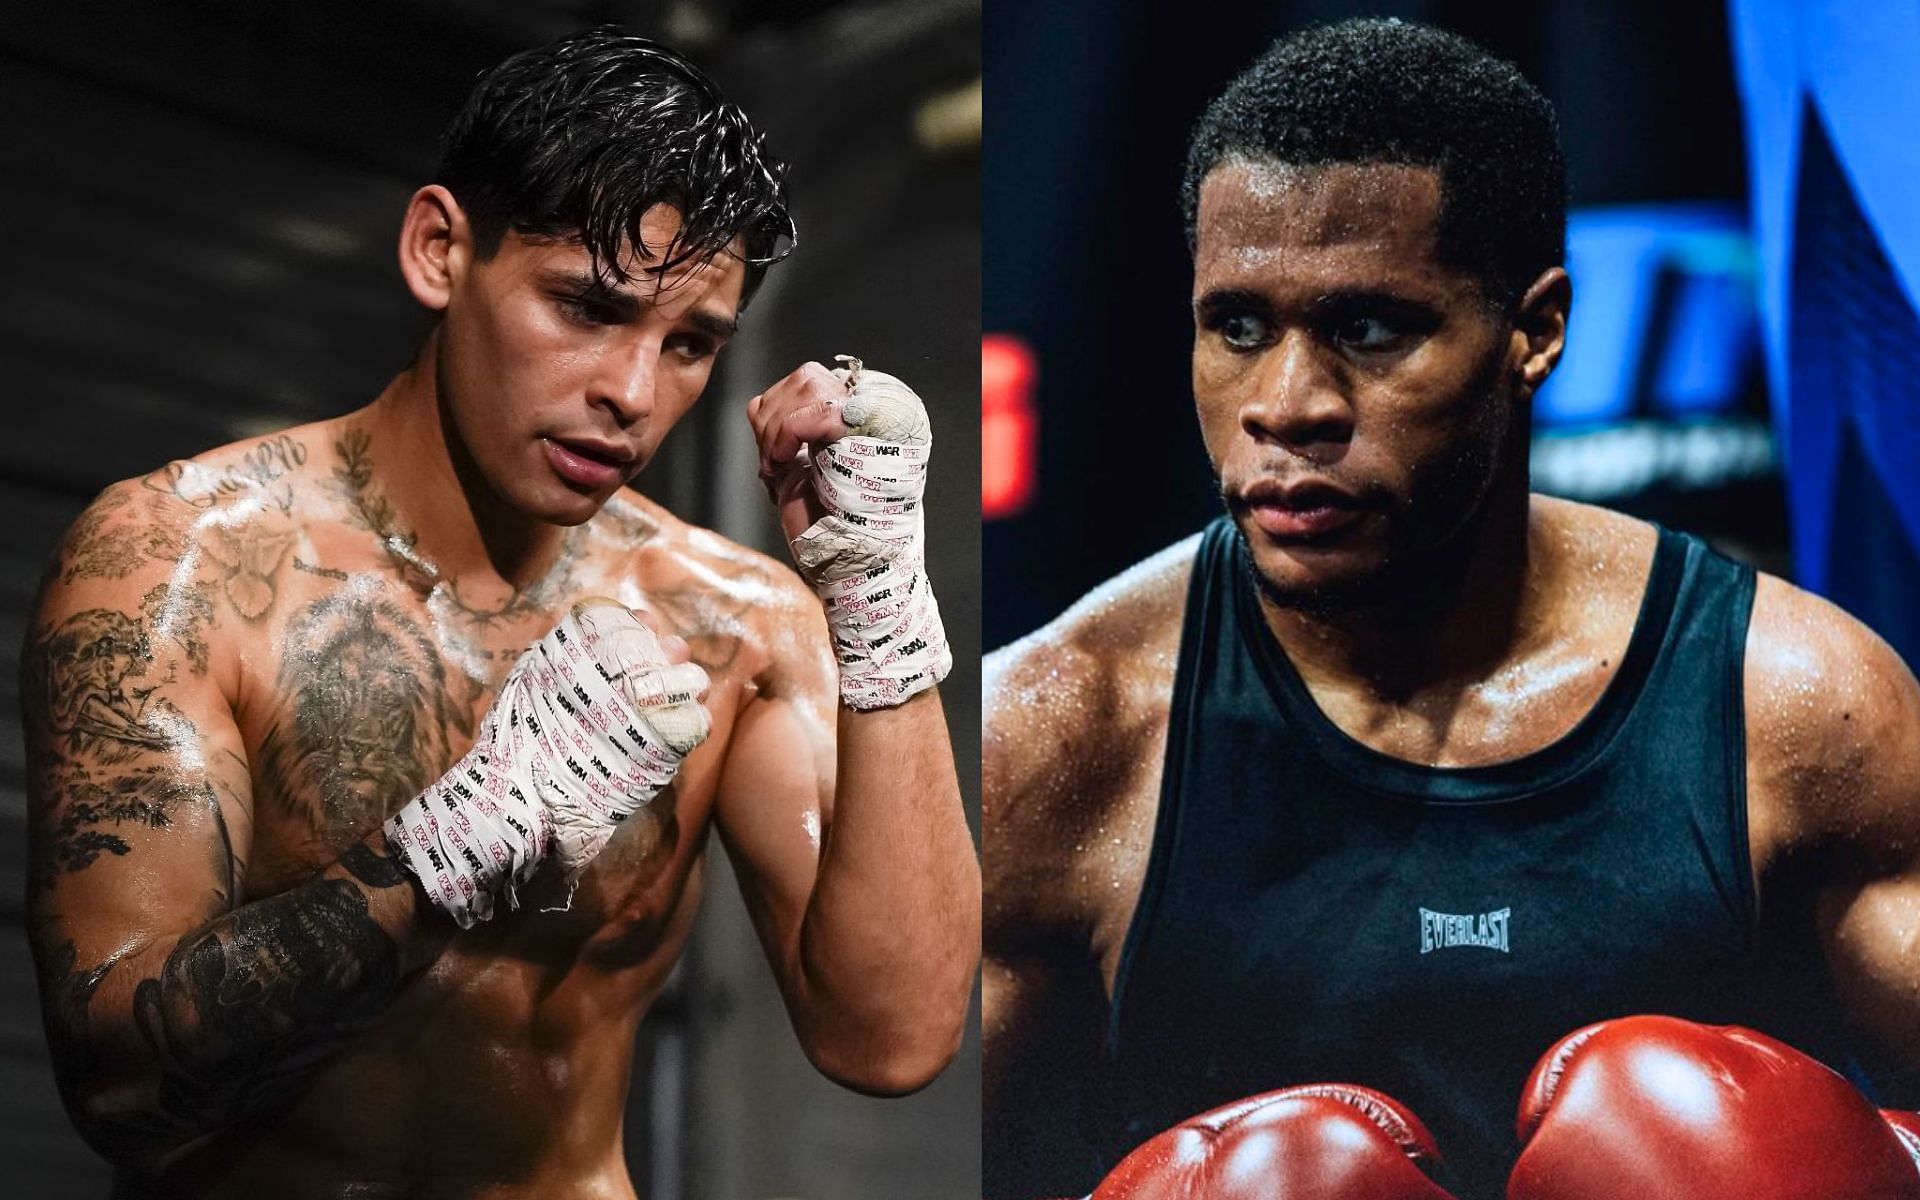 Ryan Garcia (left) warned by Eddie Hearn ahead of his clash with Devin Haney (right) on April 20th [Images Courtesy: @GettyImages and @realdevinhaney on Instagram]